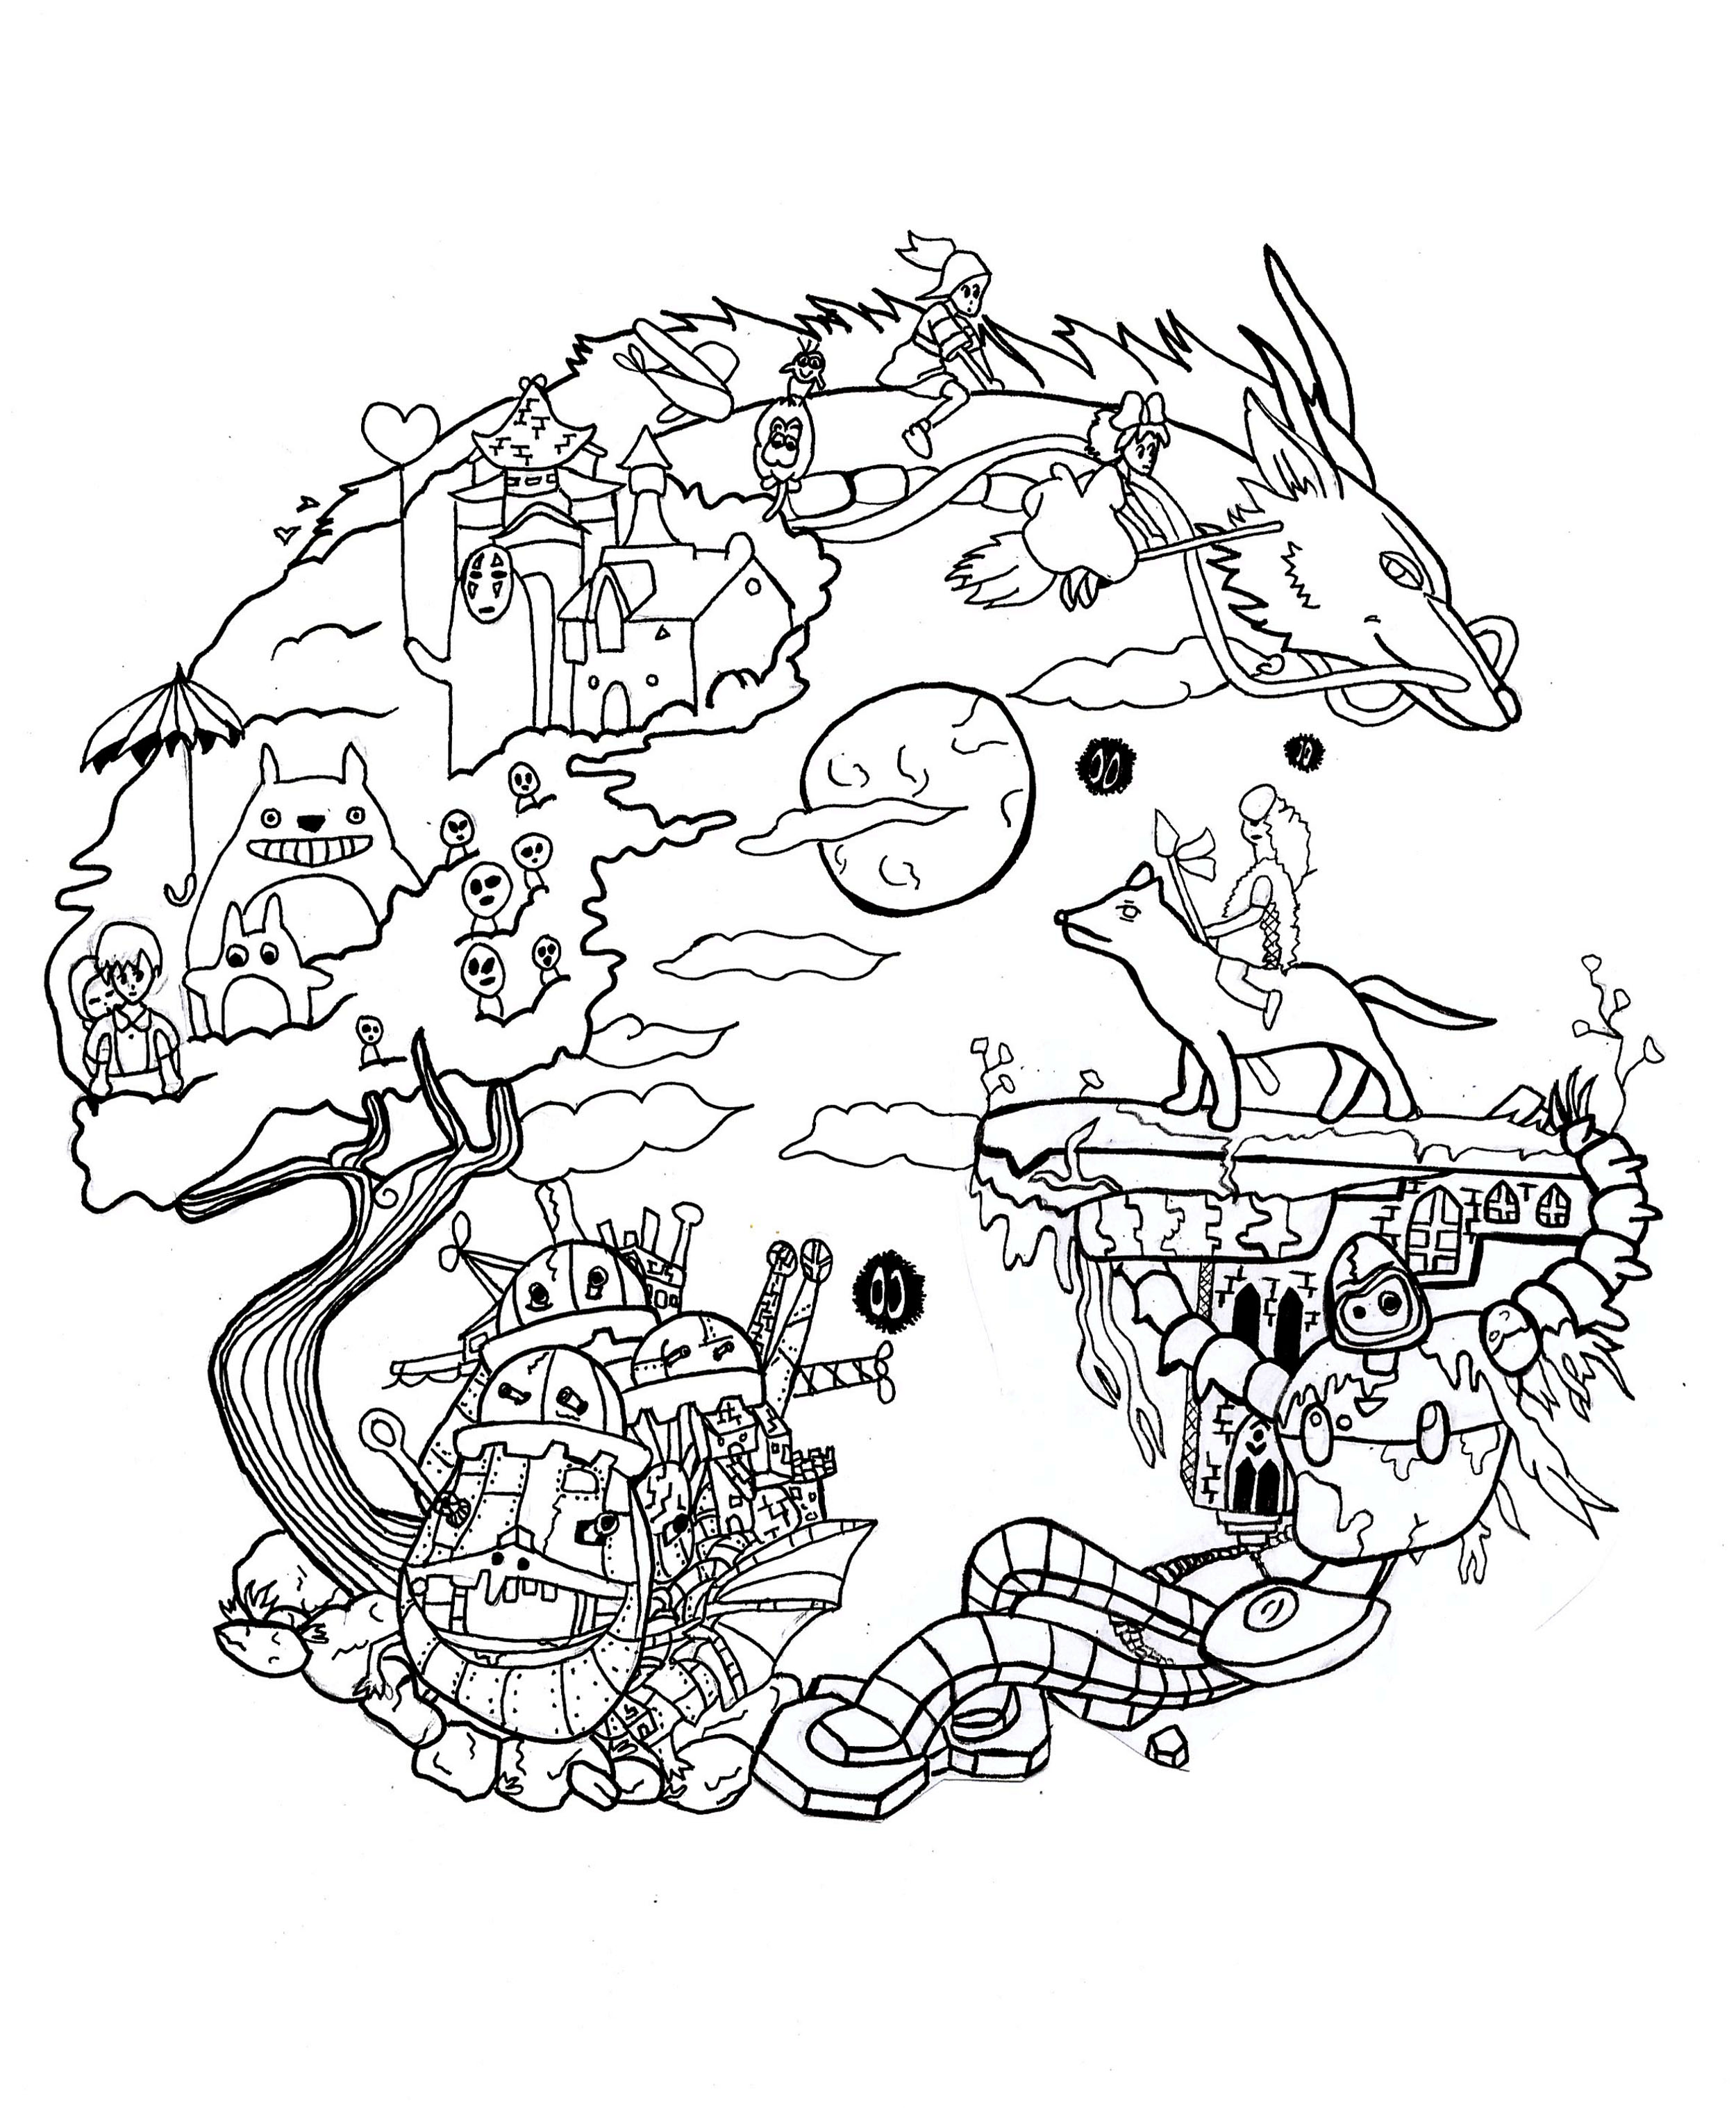 Mandal composed by Studio Ghibli characters (fan art). Details relatively simple to color, for a Mandala coloring page very unique and of high quality. You must clear your mind and allow yourself to forget all your worries and responsibilities.